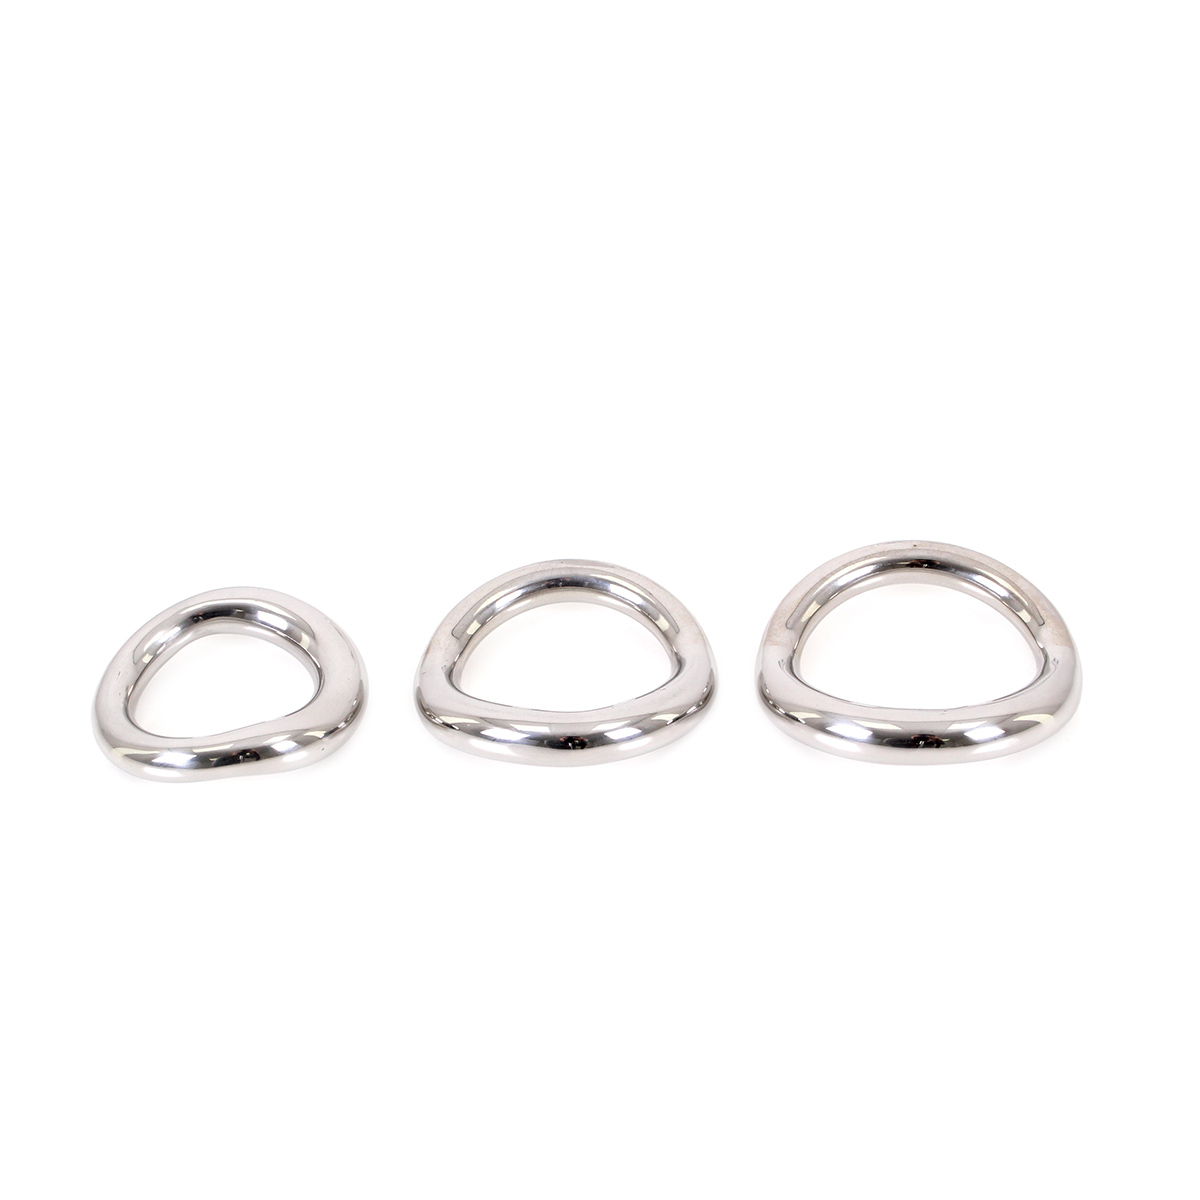 Costum-Fit-Cockring-50-mm-OPR-277046-4